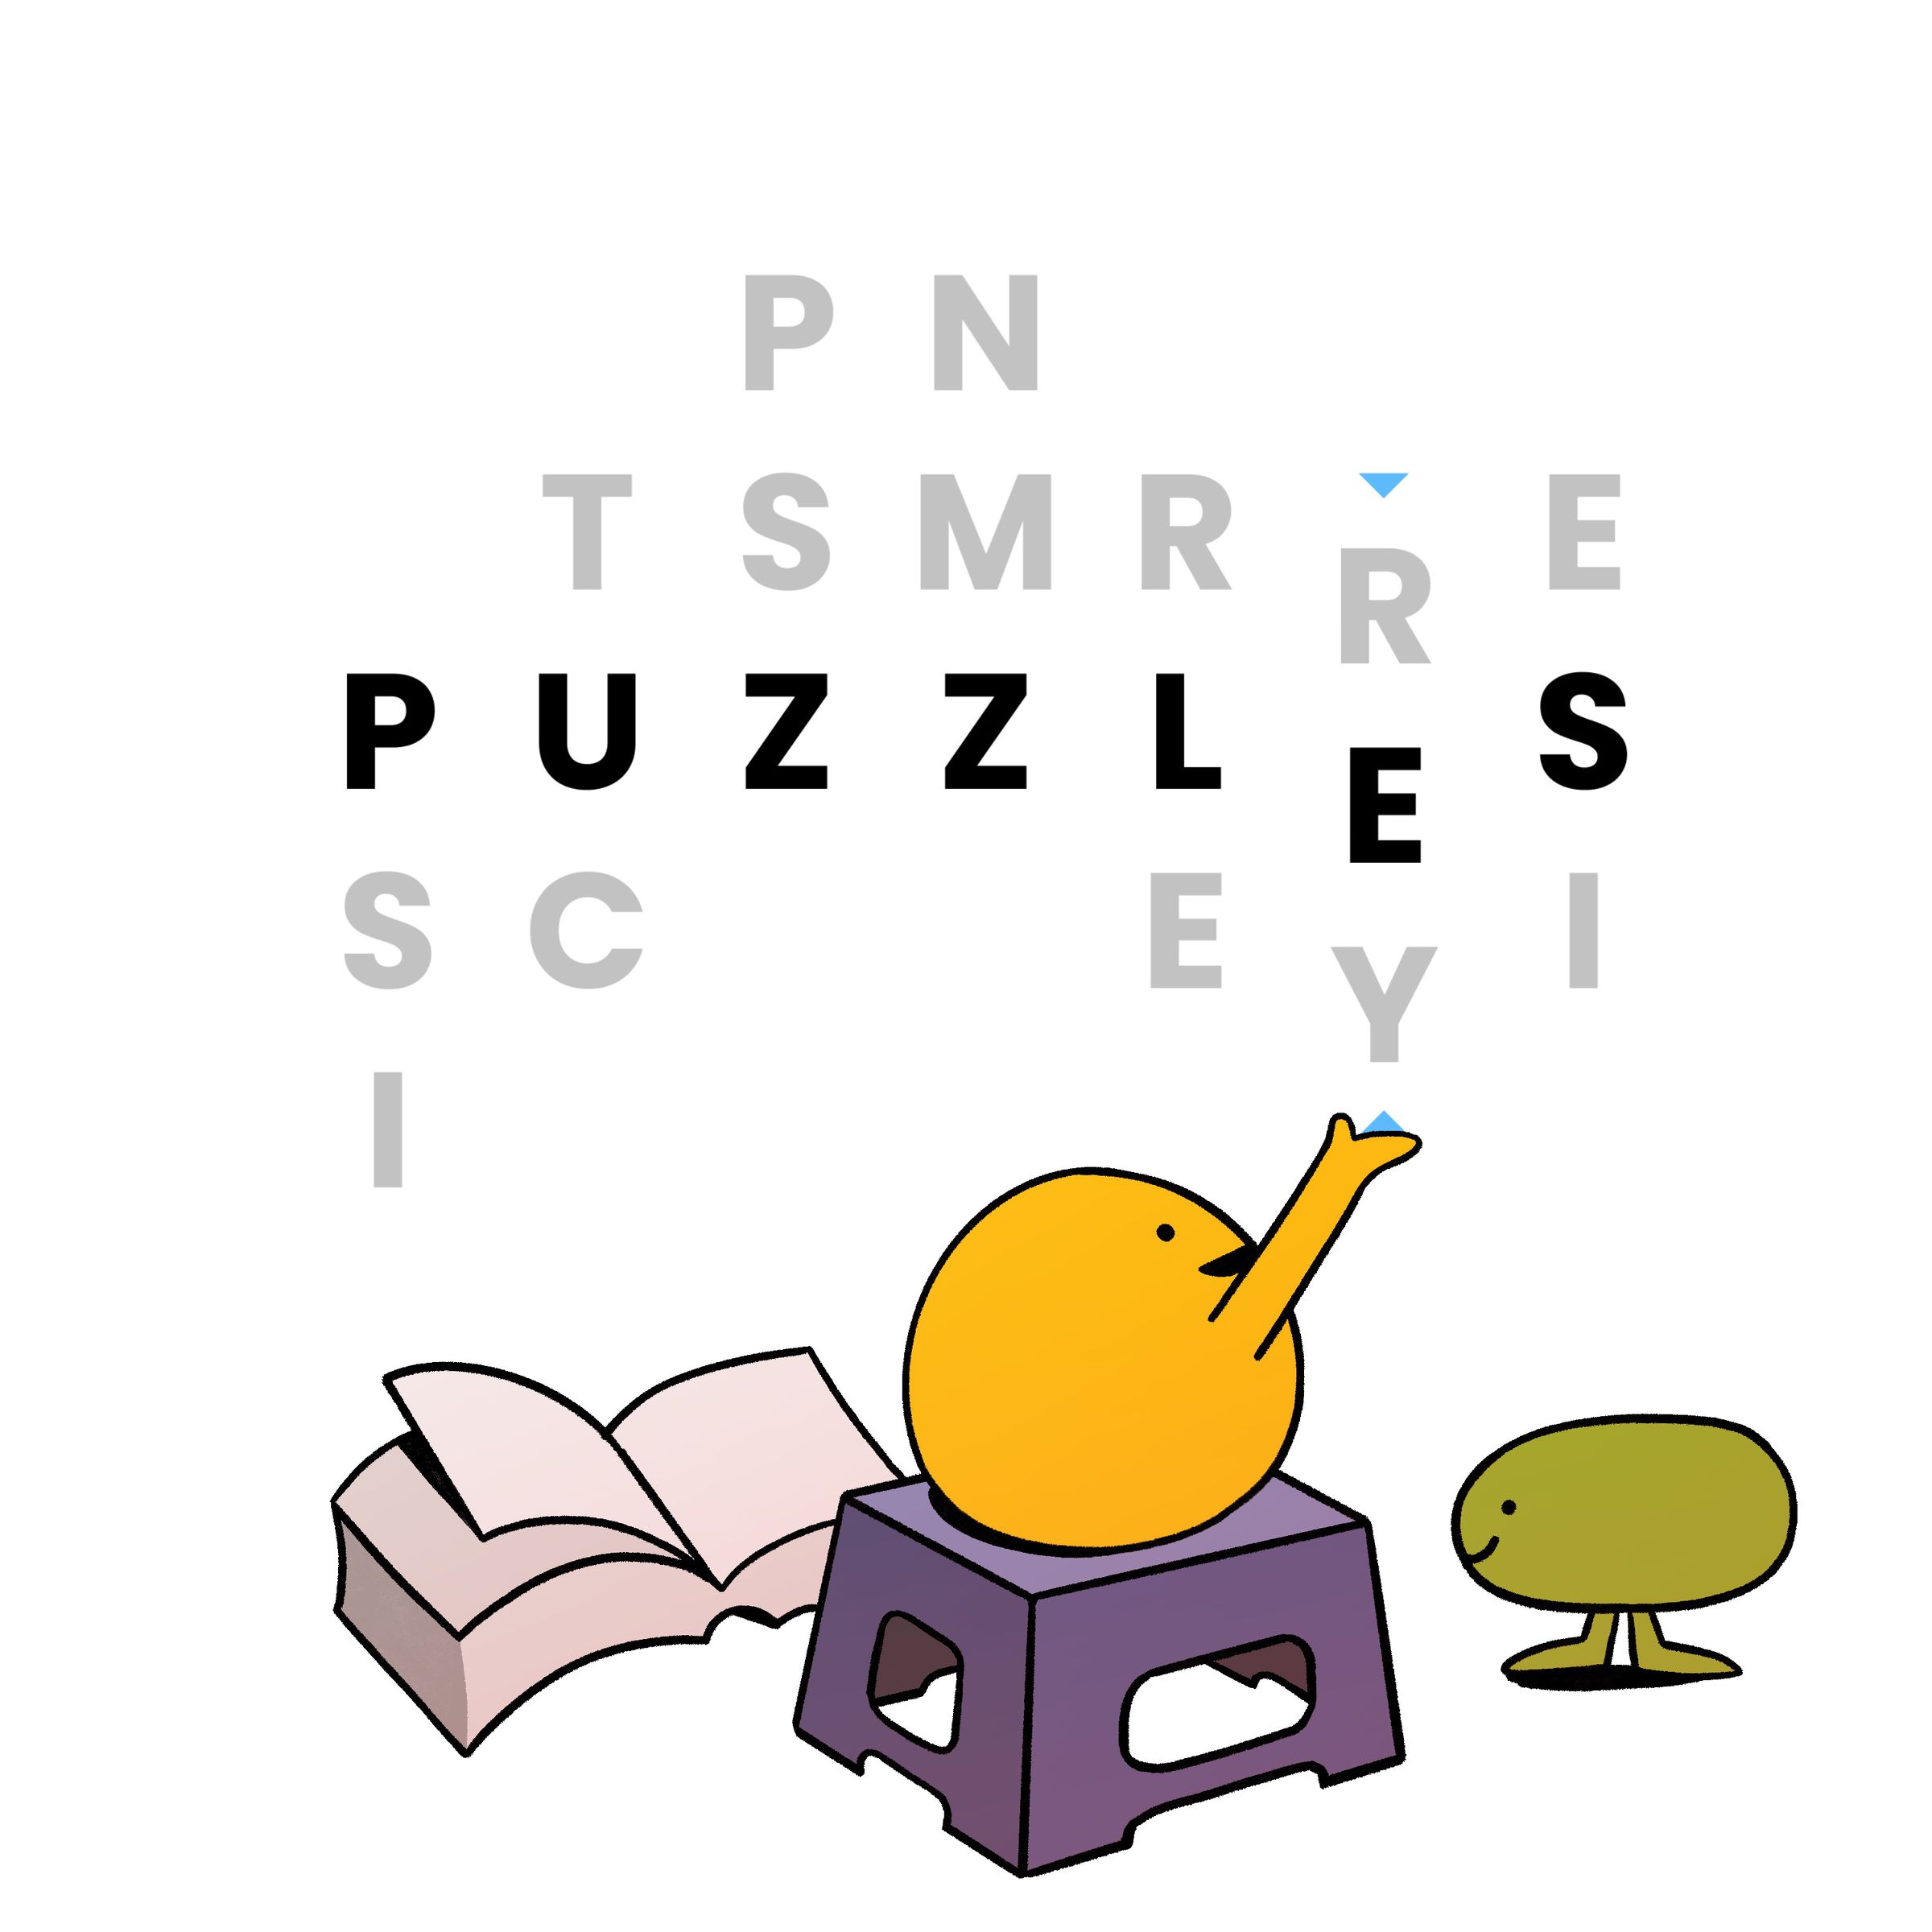 Promotional art for the puzzle game site Puzzmo.